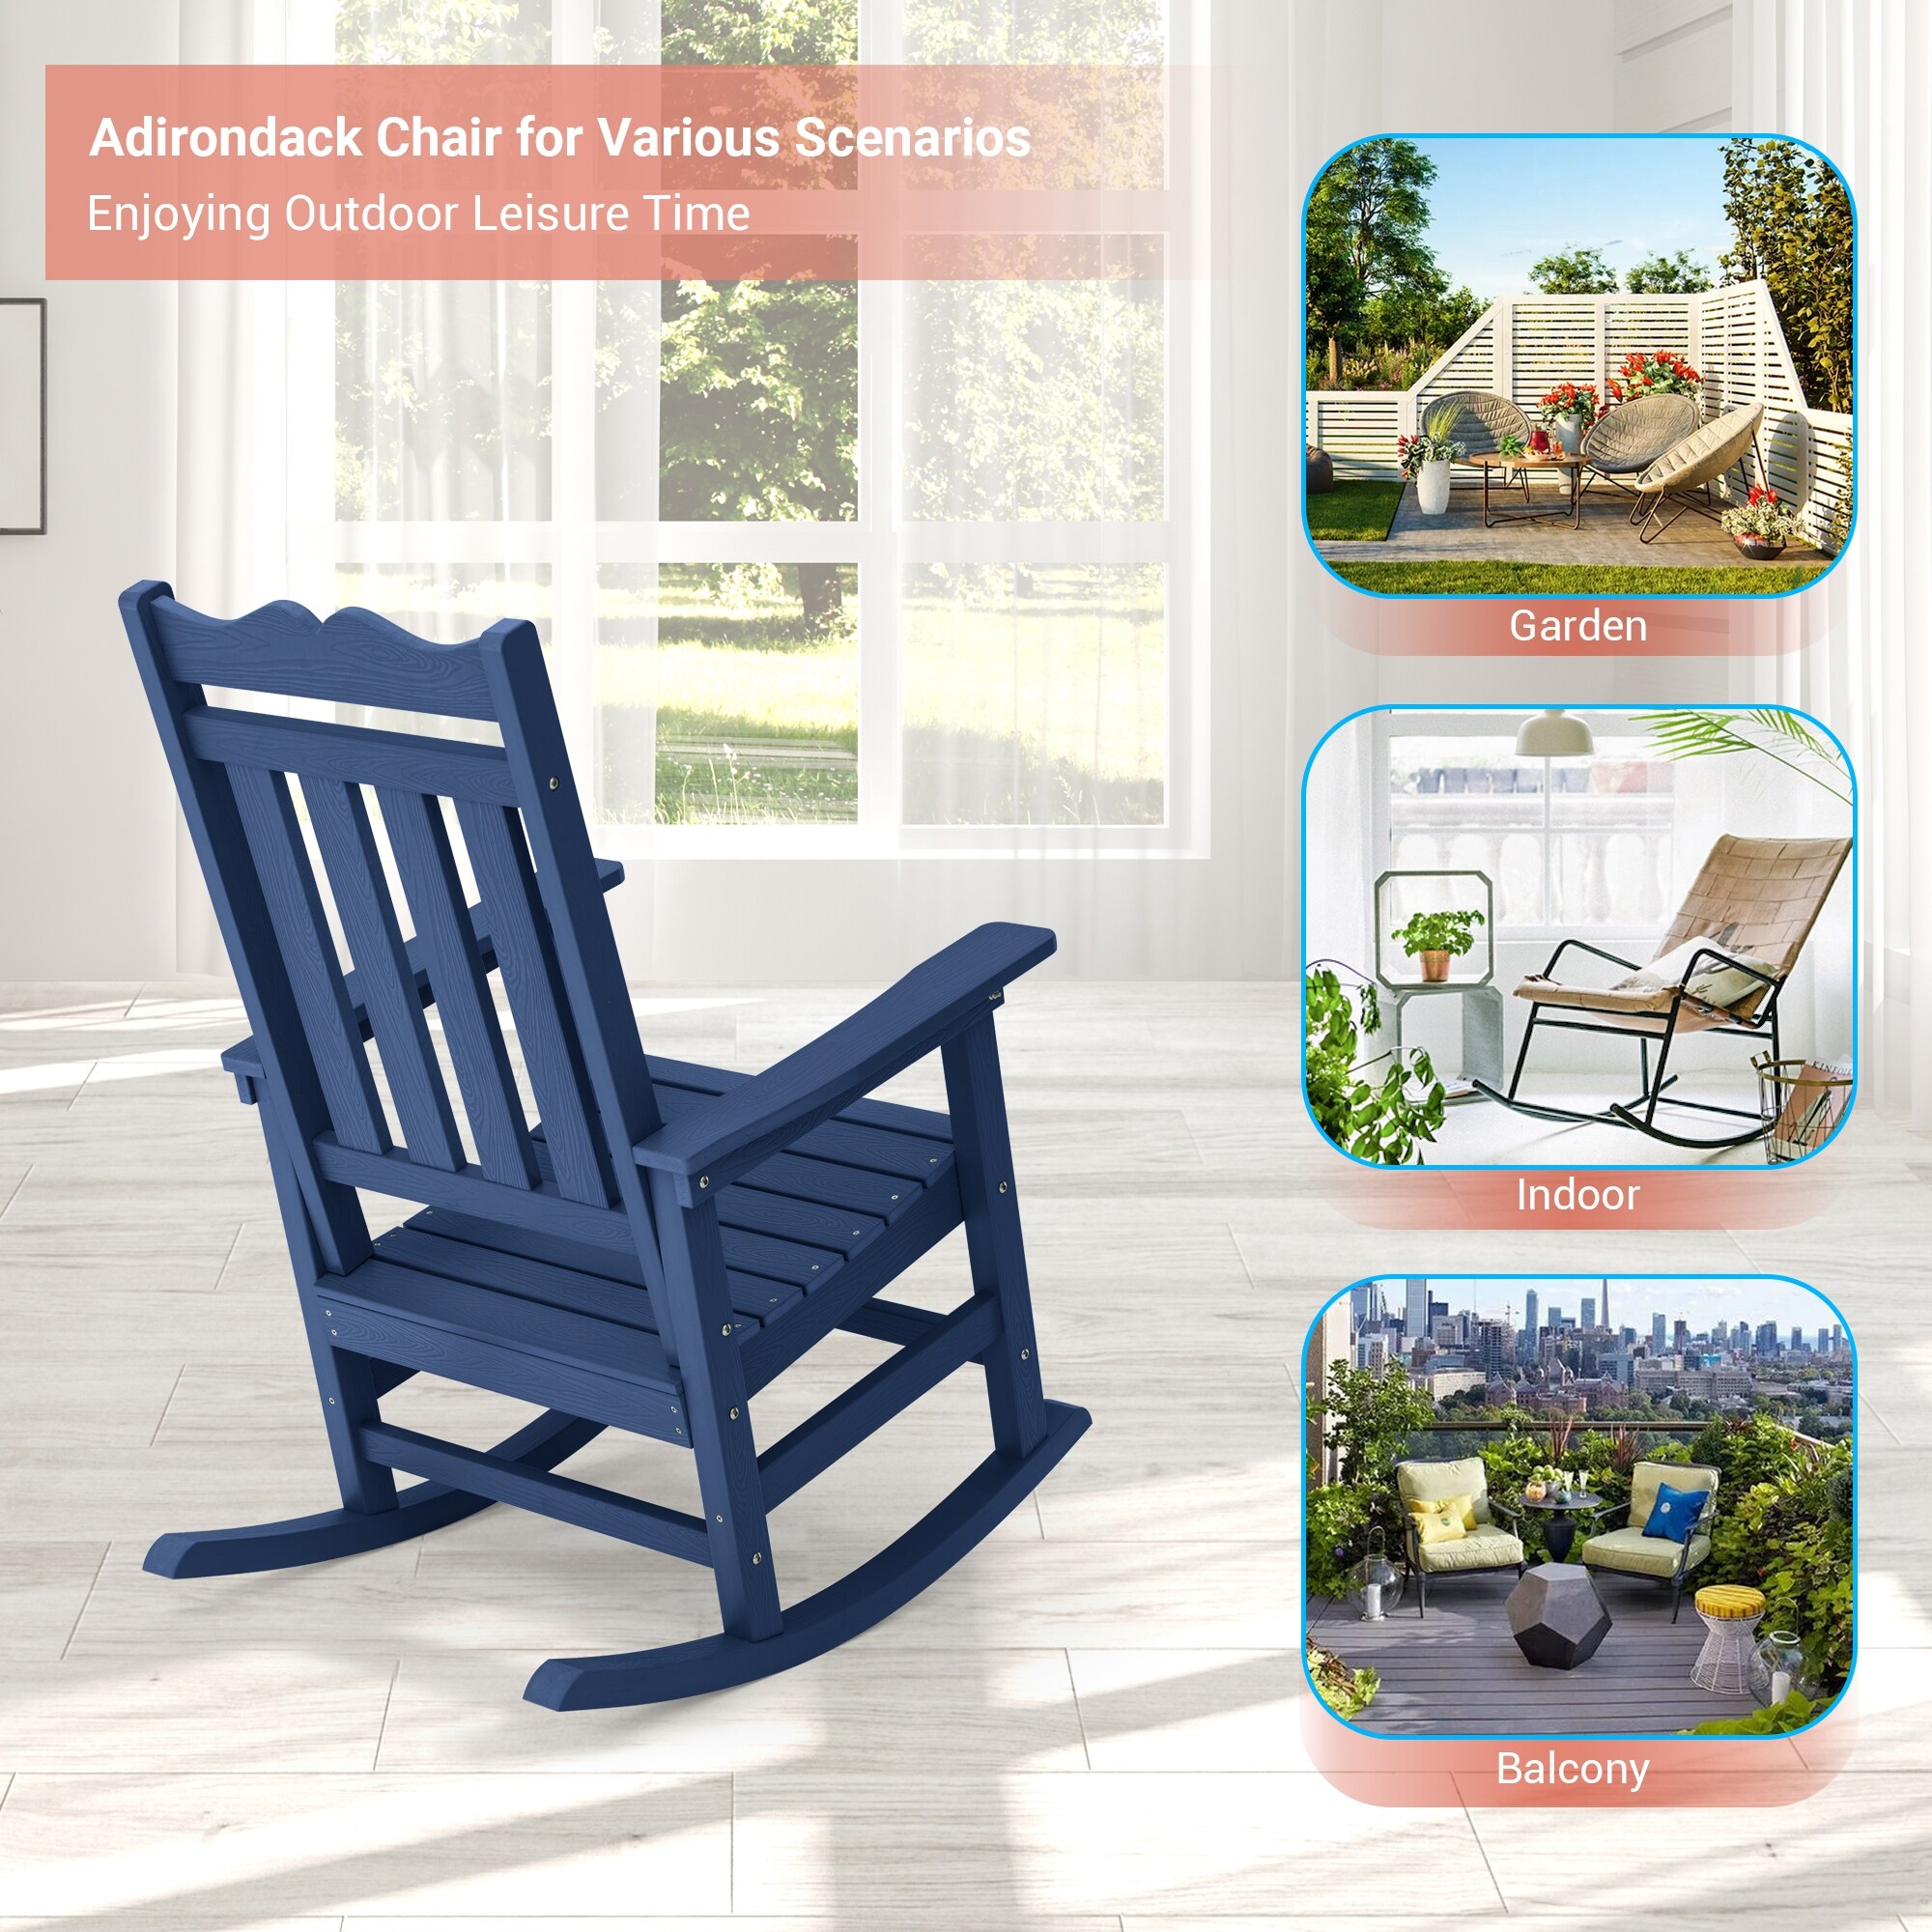 AOOLIMICS Patio Adirondack Chair,Outdoor Lounge Rocking Chair Fire Pit